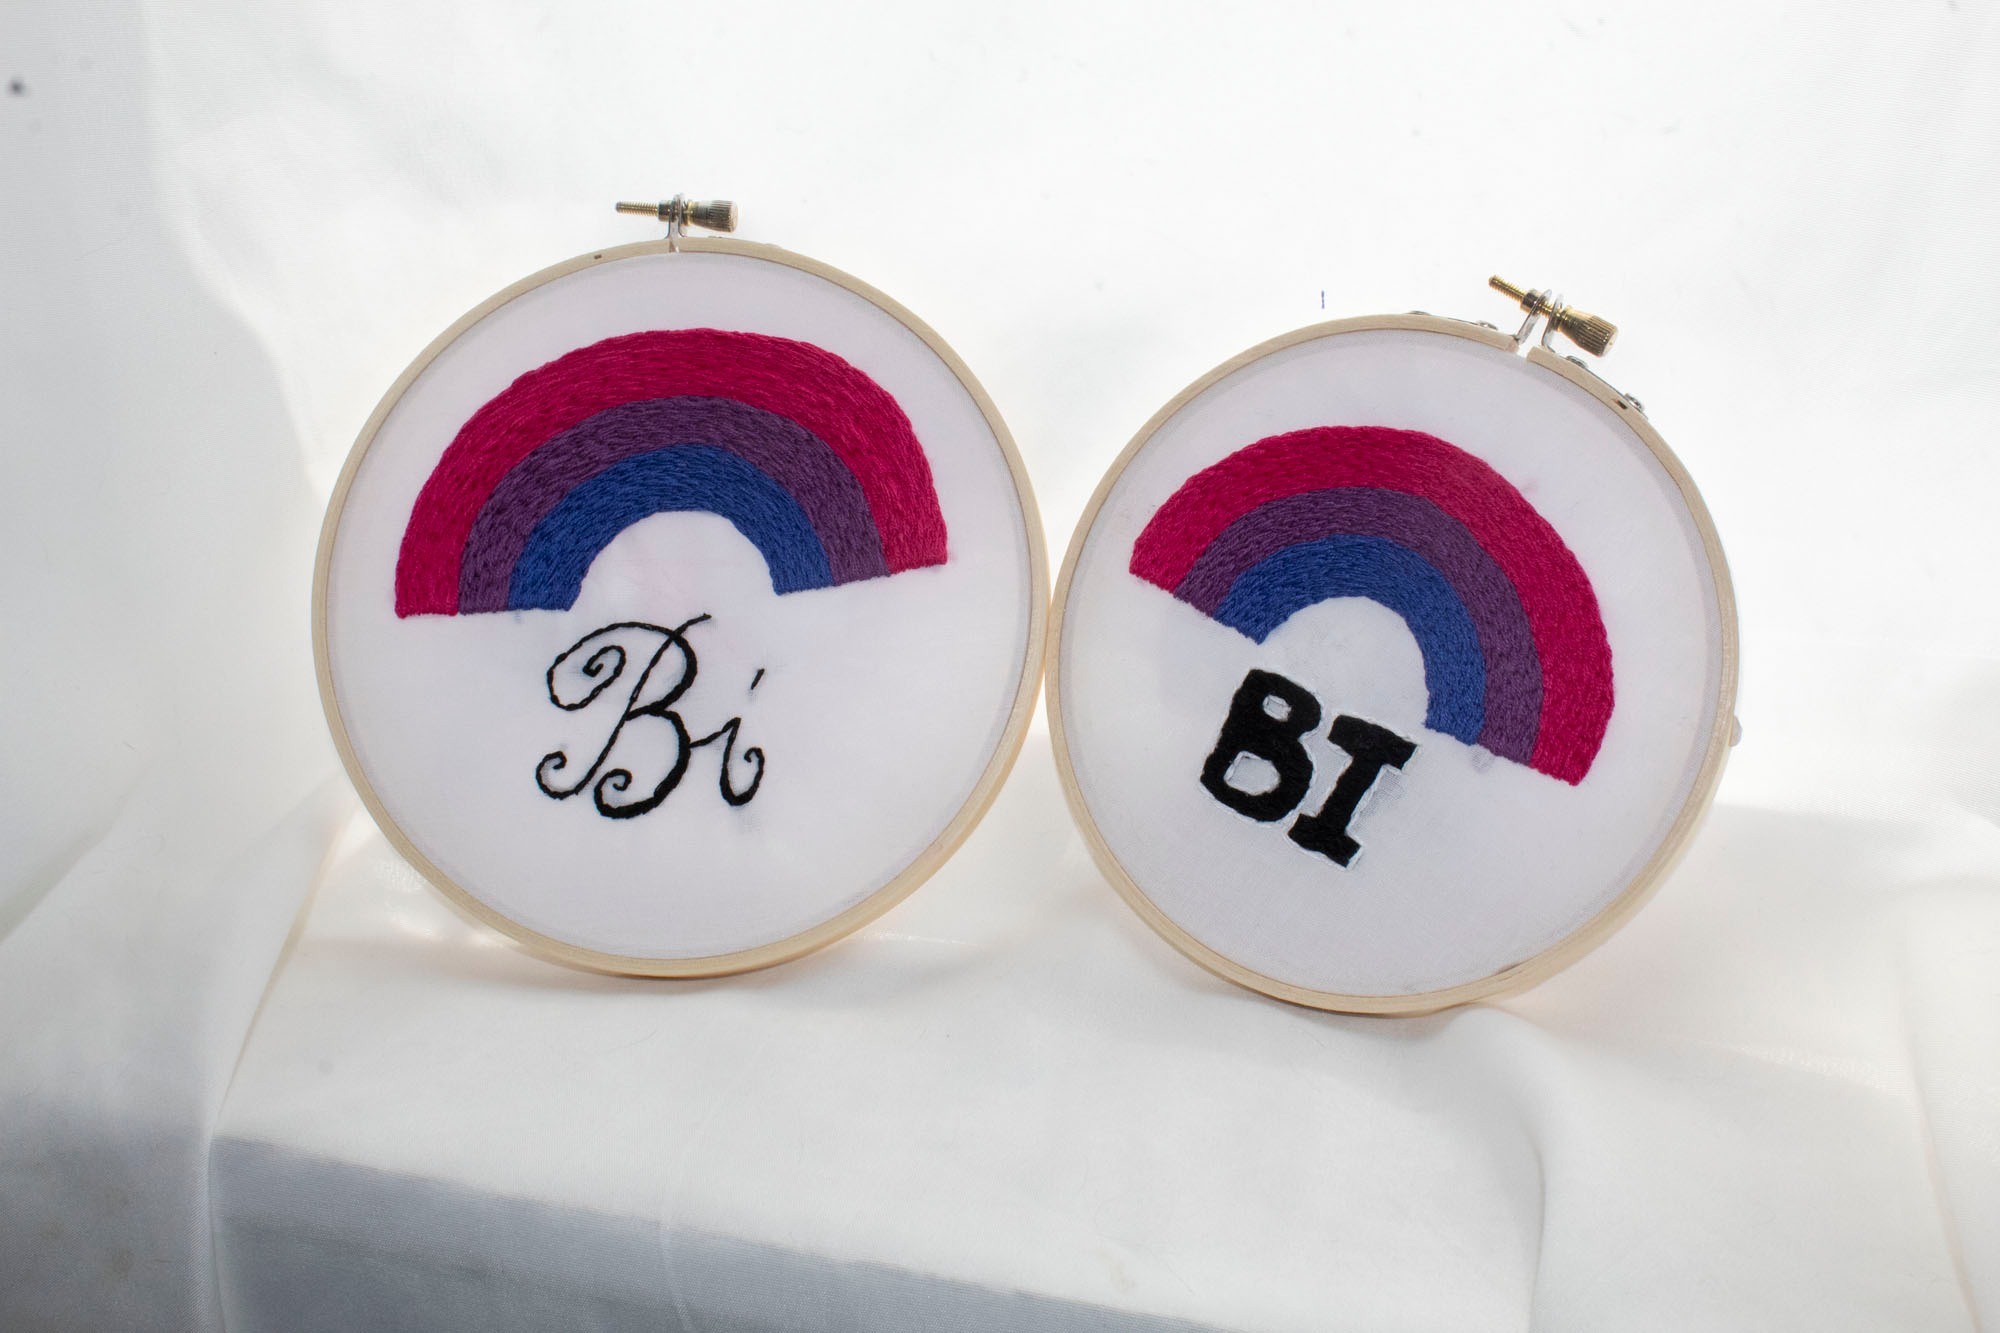 Product image of both styles of Bi Pride embroideries set against a white curtain